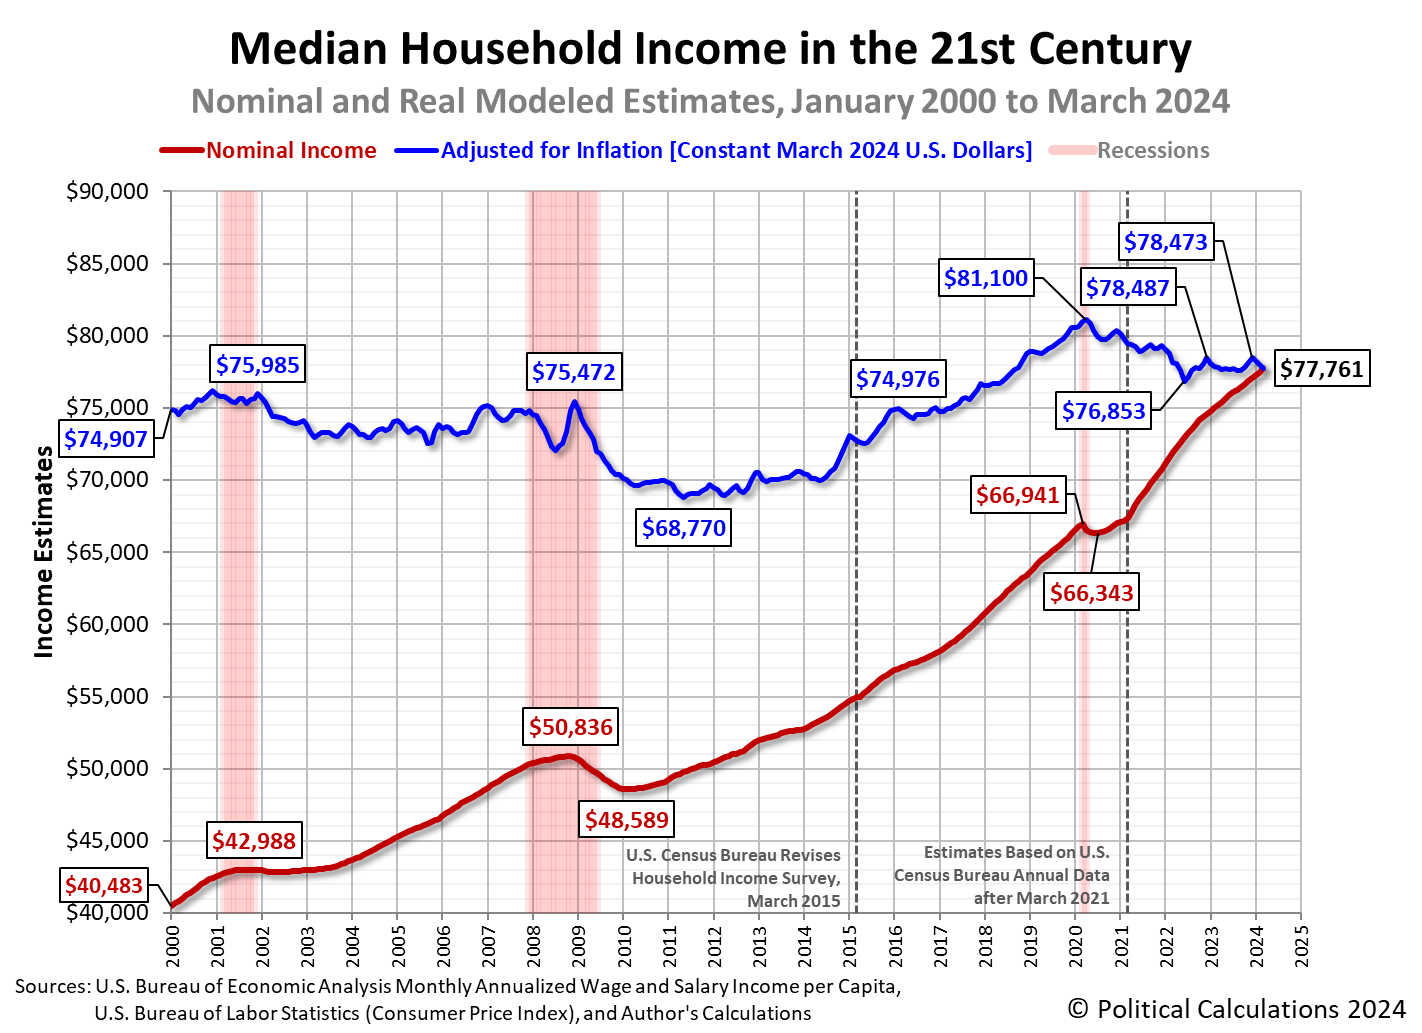 Median Household Income in the 21st Century: Nominal and Real Modeled Estimates, January 2000 to March 2024